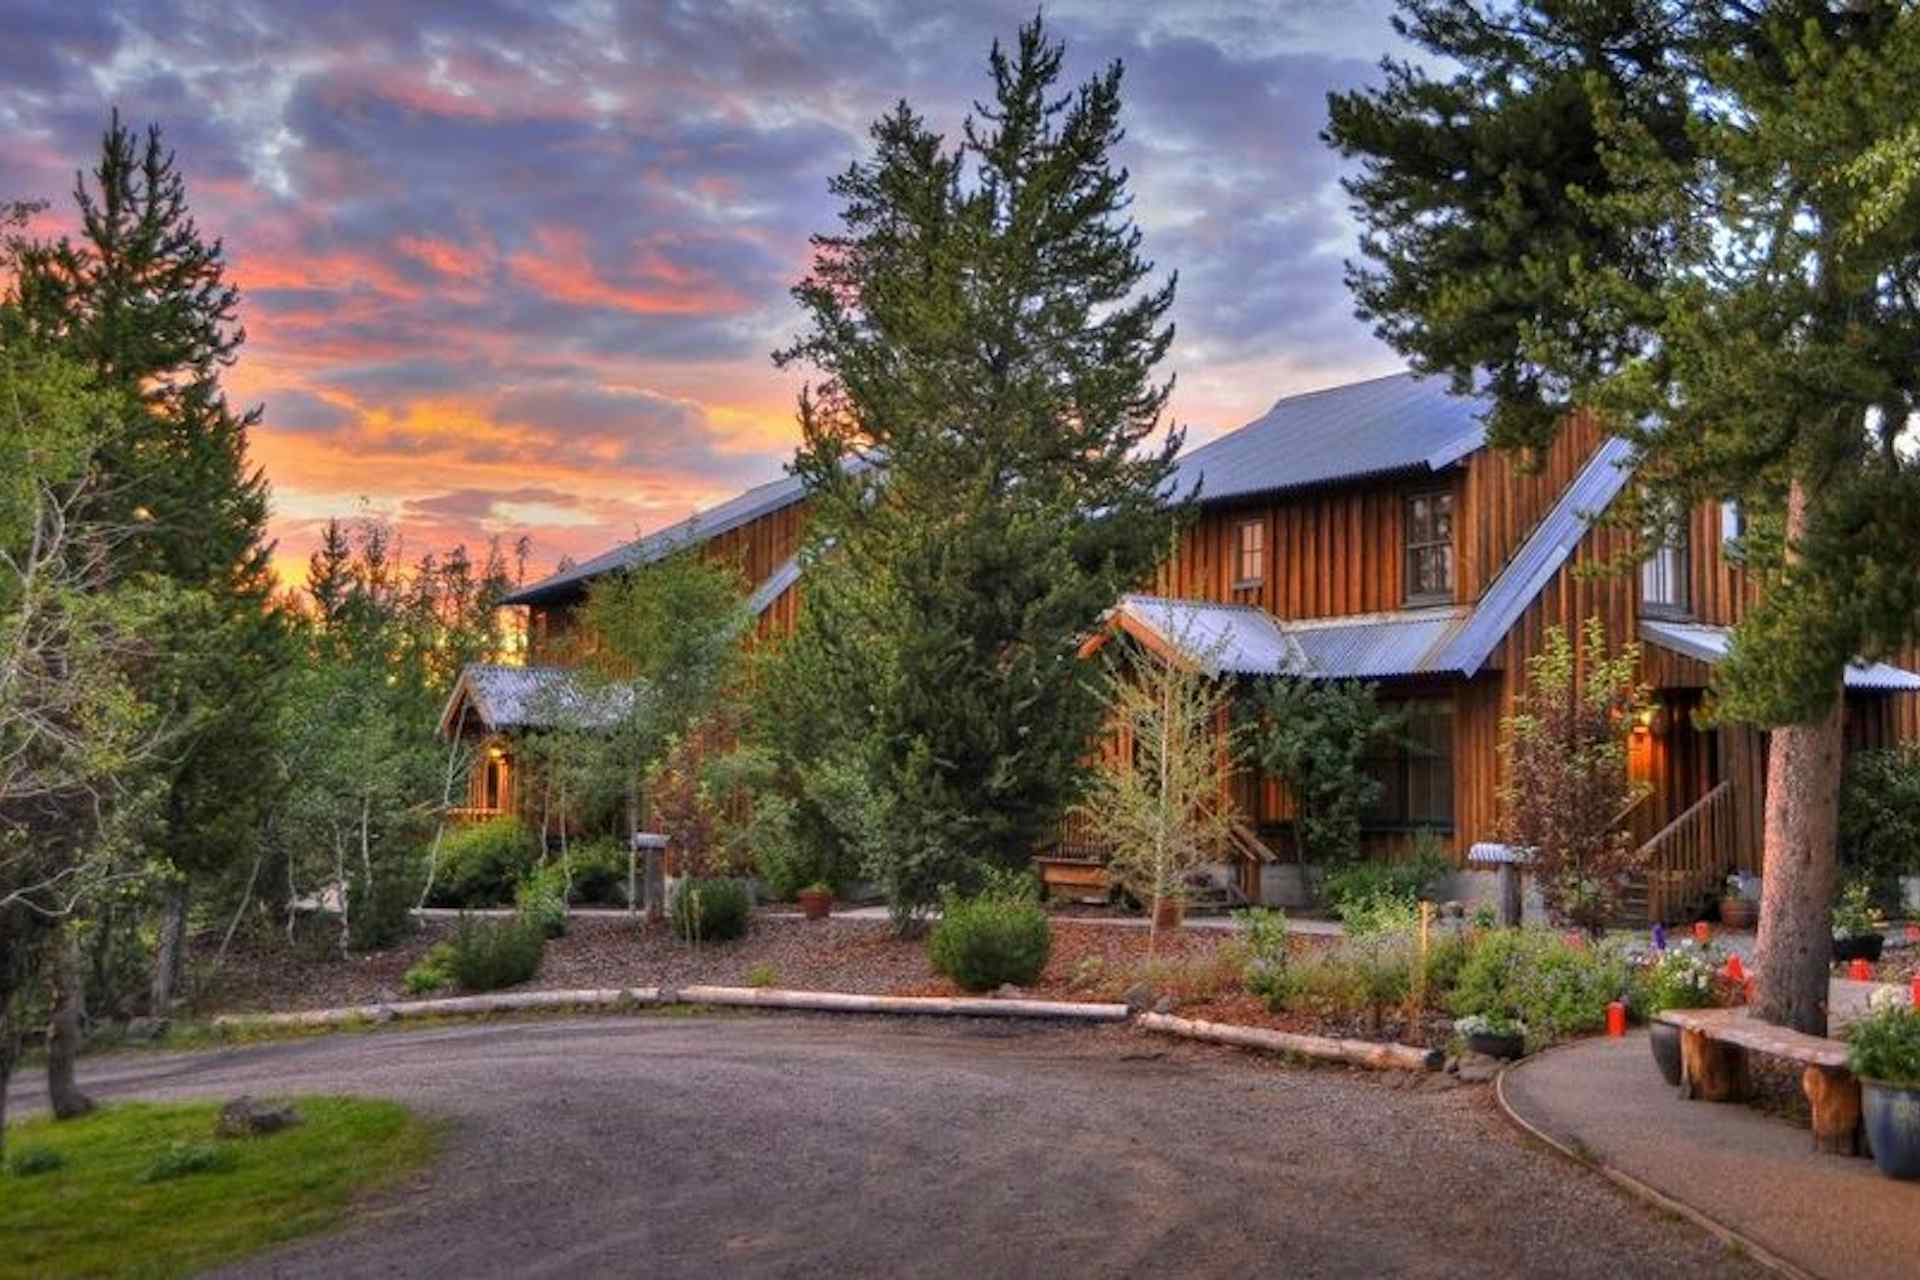 Henry's Fork Lodge of the Yellowstone Teton Territory mixes luxury with rustic flair. 